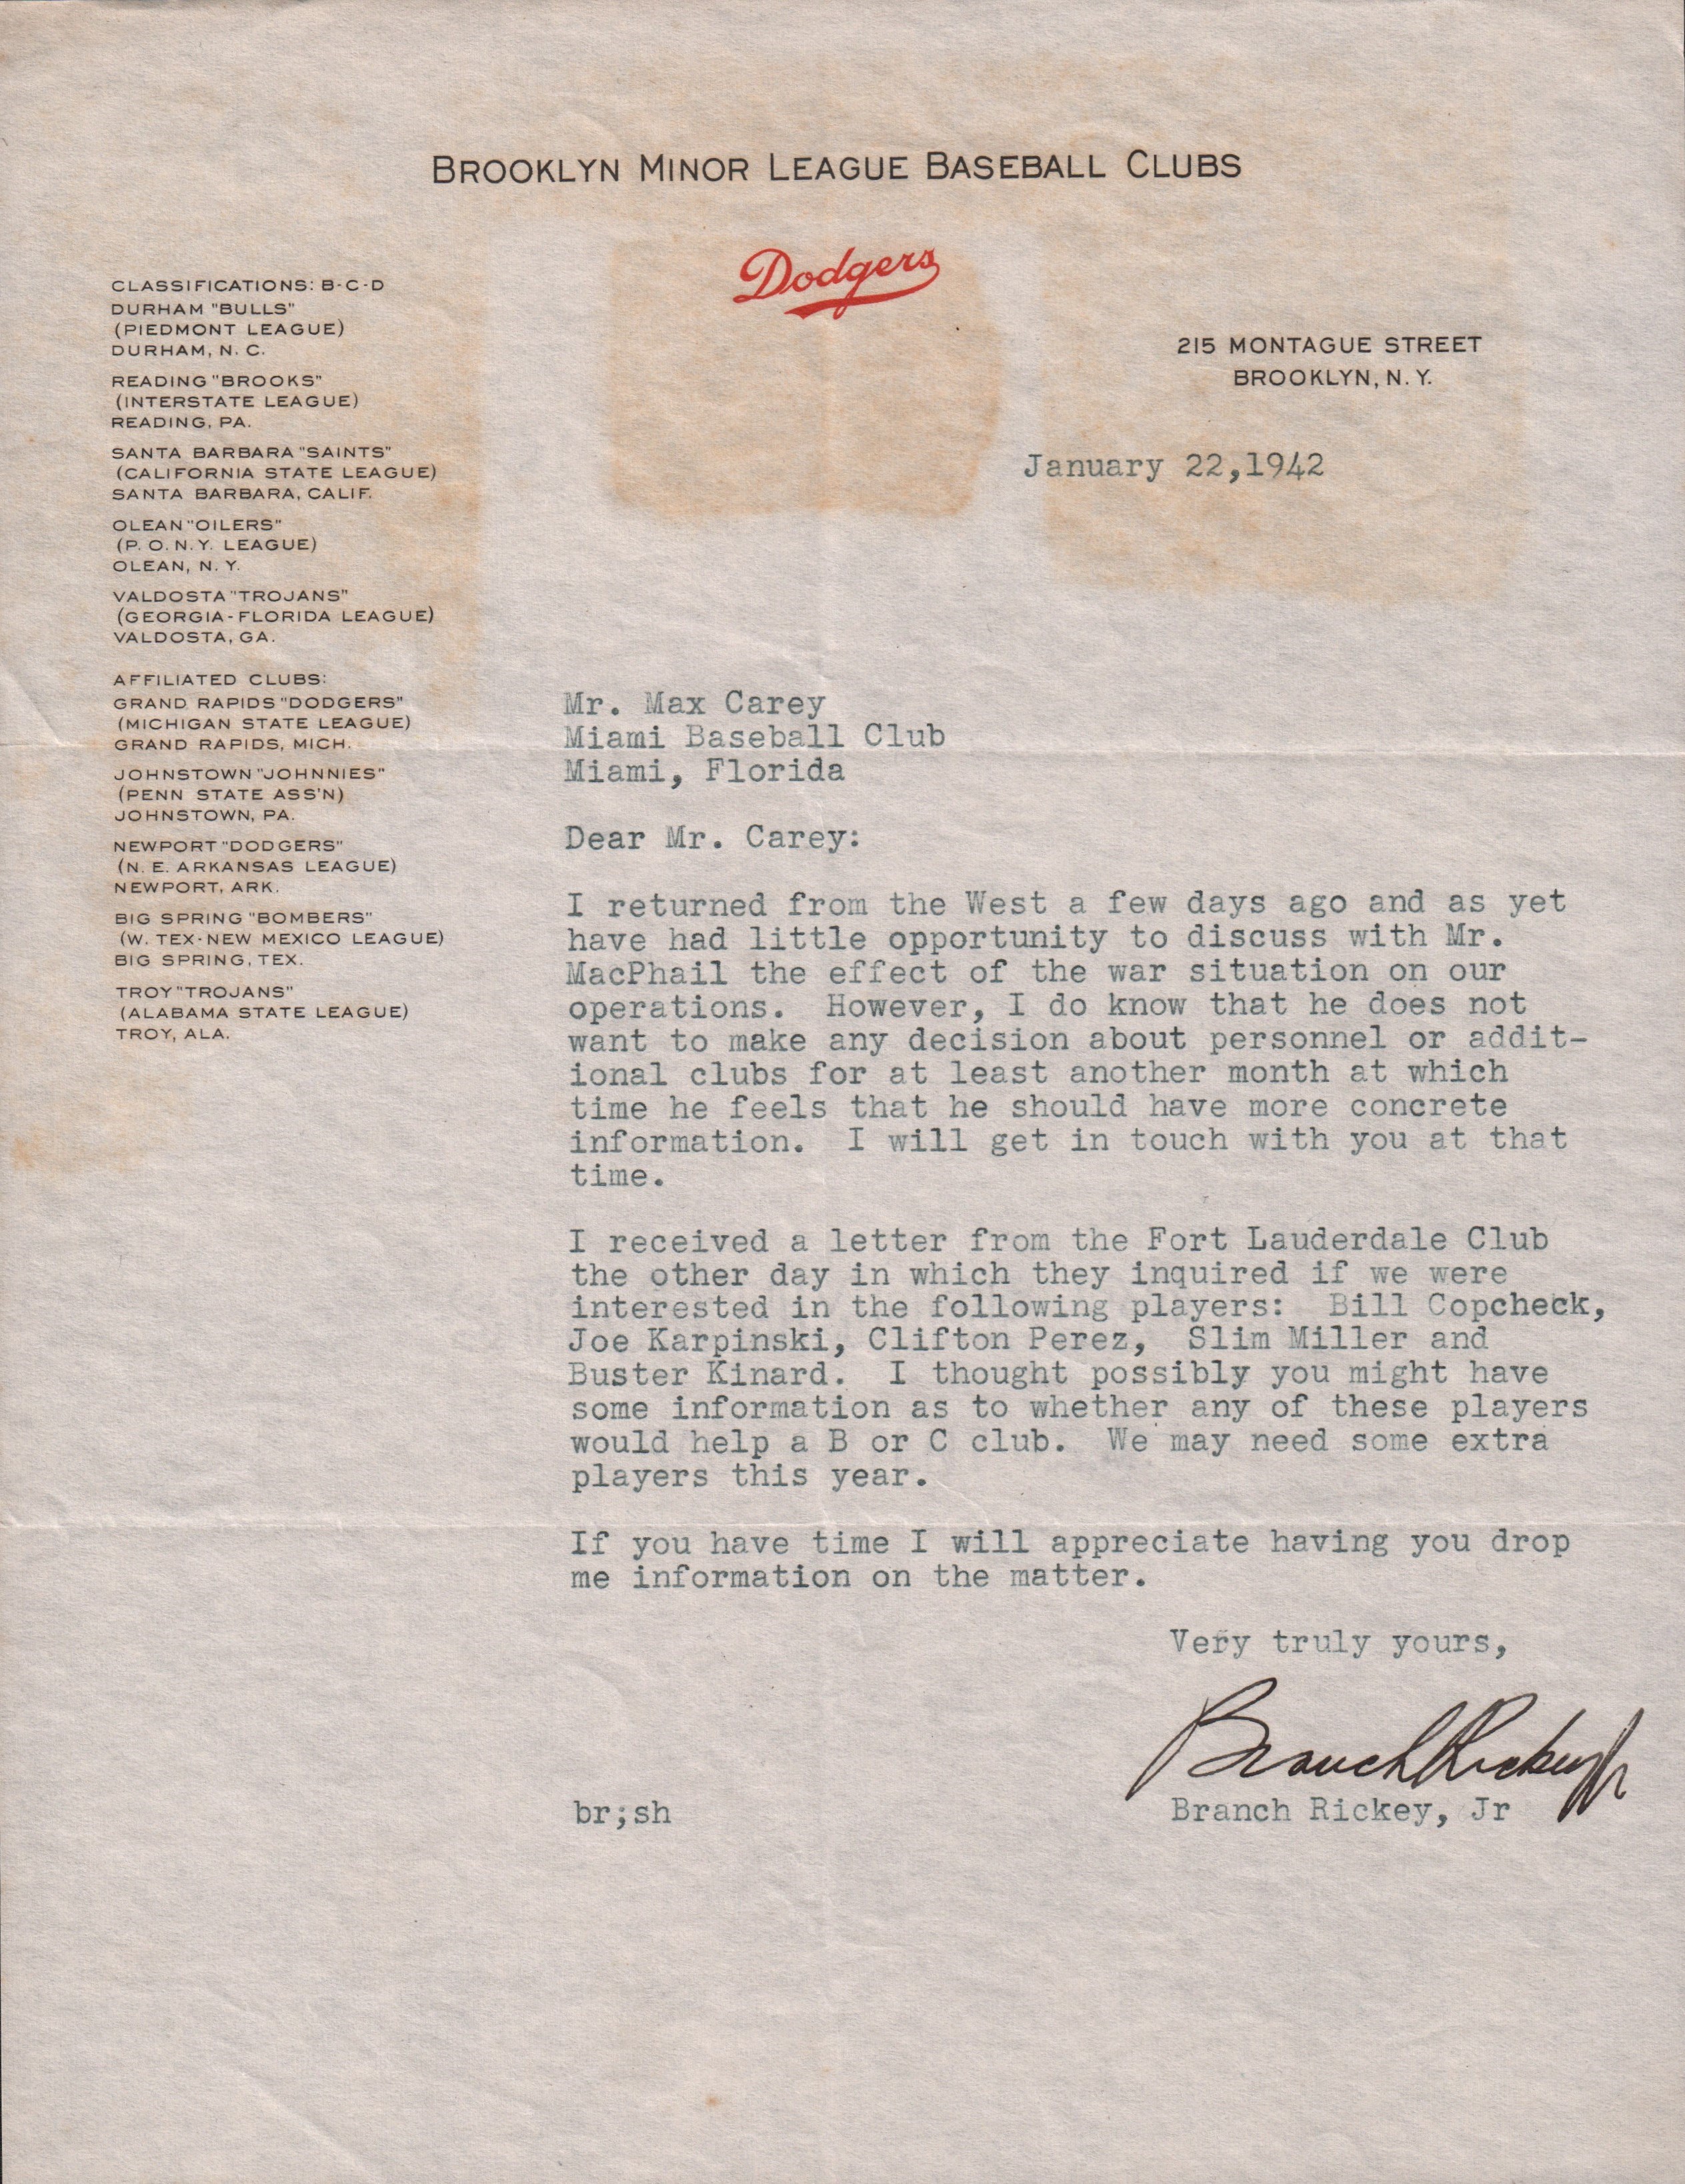 Two Branch Rickey Jr. Letters to Max Carey